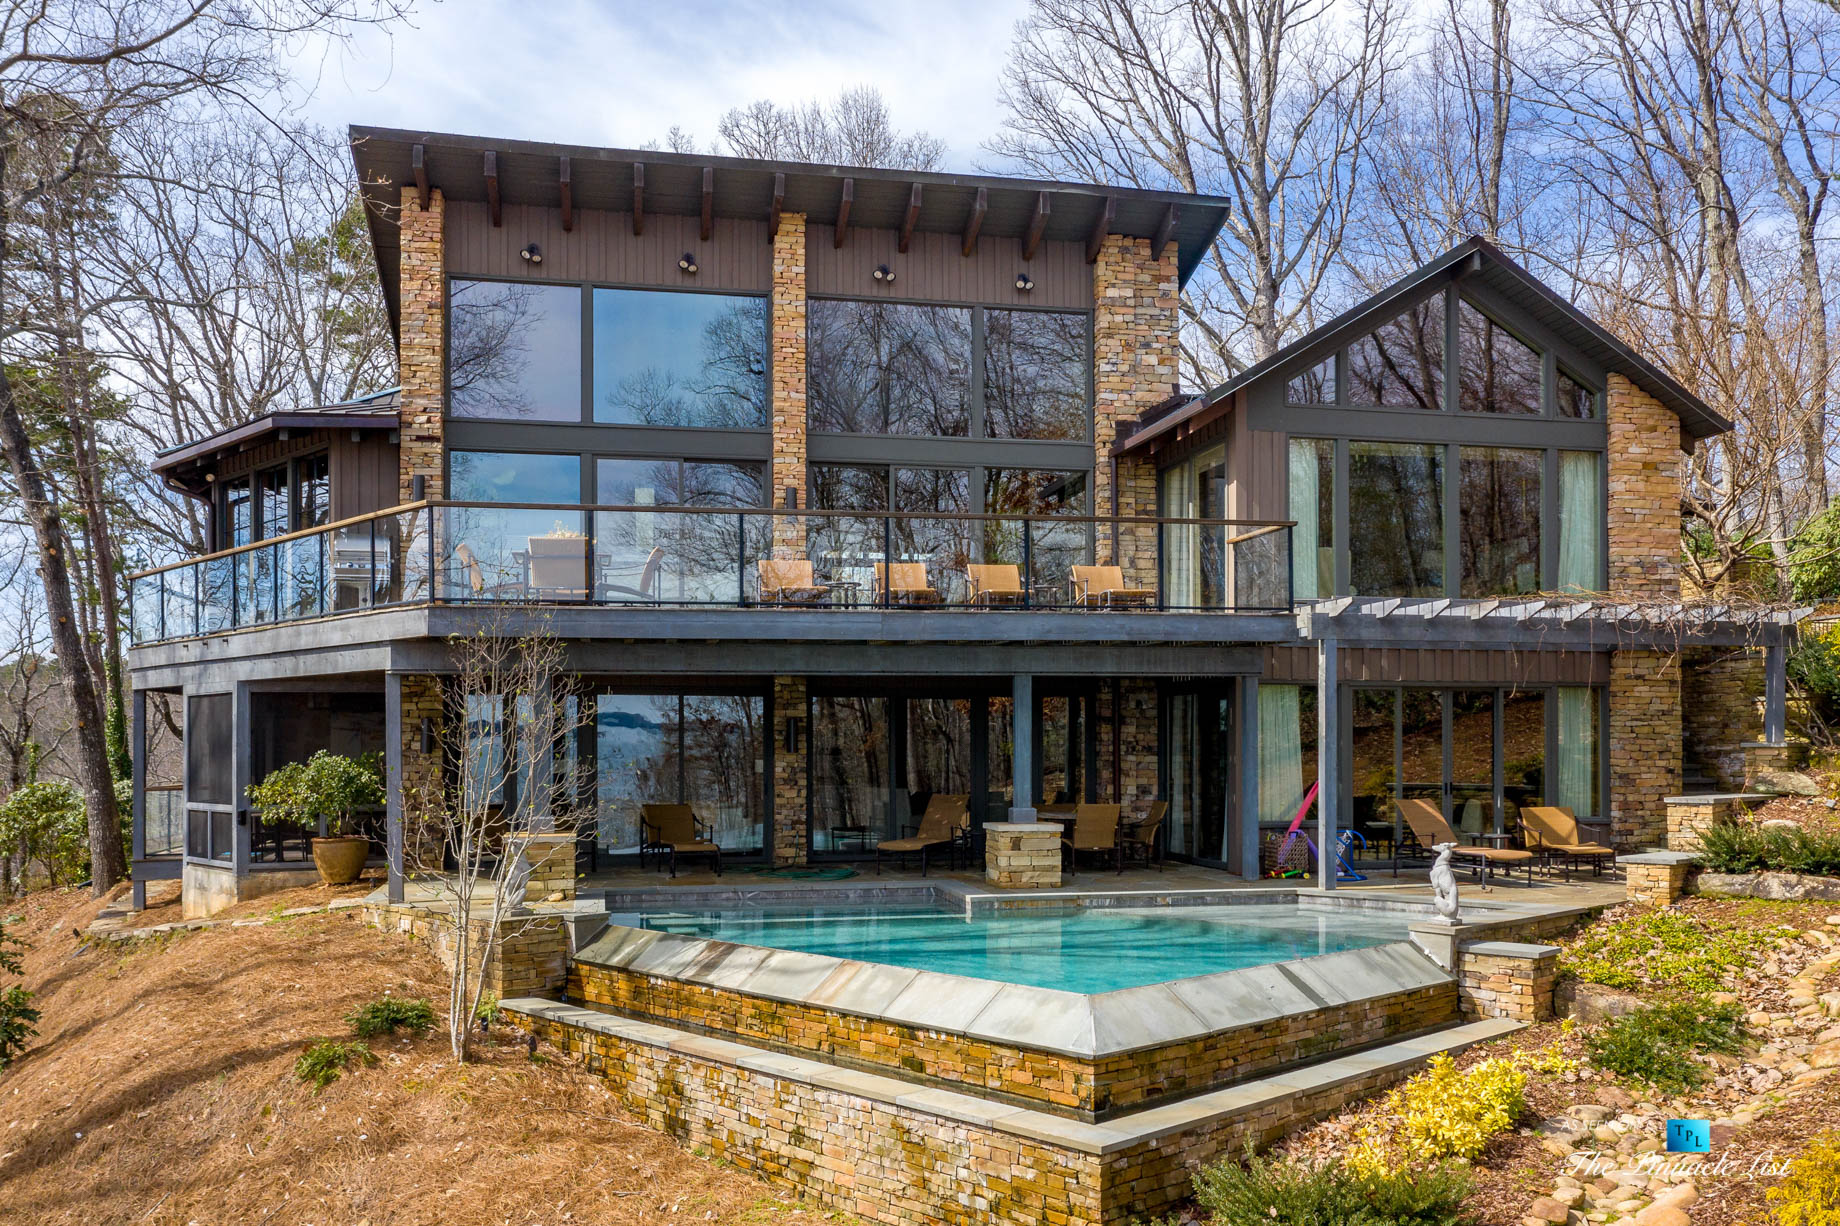 7860 Chestnut Hill Rd, Cumming, GA, USA - Exterior Deck and Pool - Luxury Real Estate - Lake Lanier Mid-Century Modern Stone Home